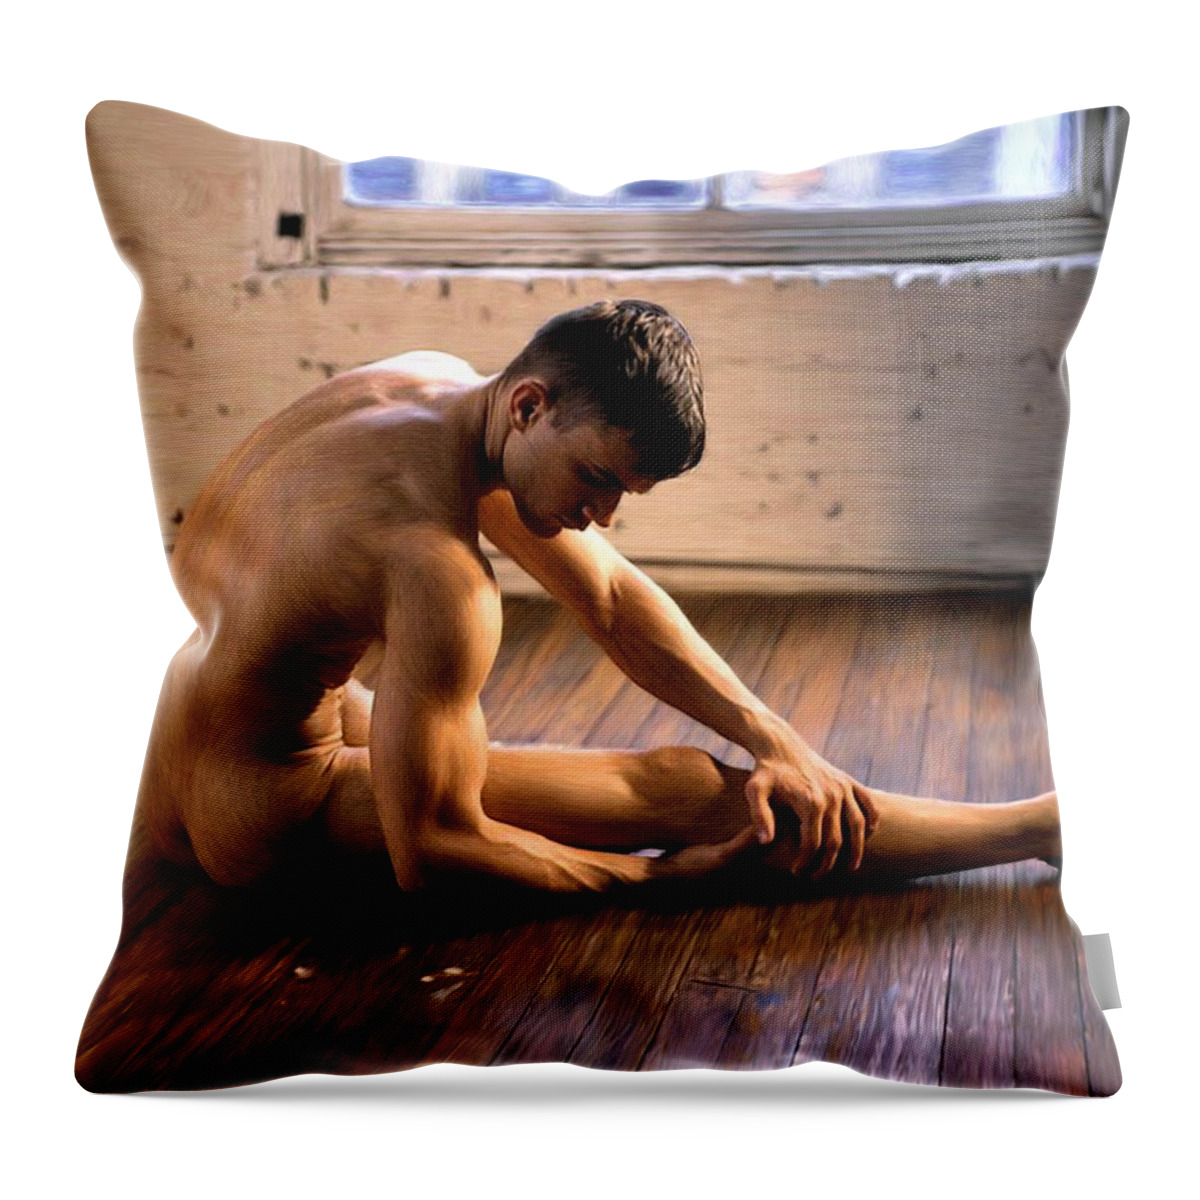 Limbering Throw Pillow featuring the painting Limbering Up by Troy Caperton